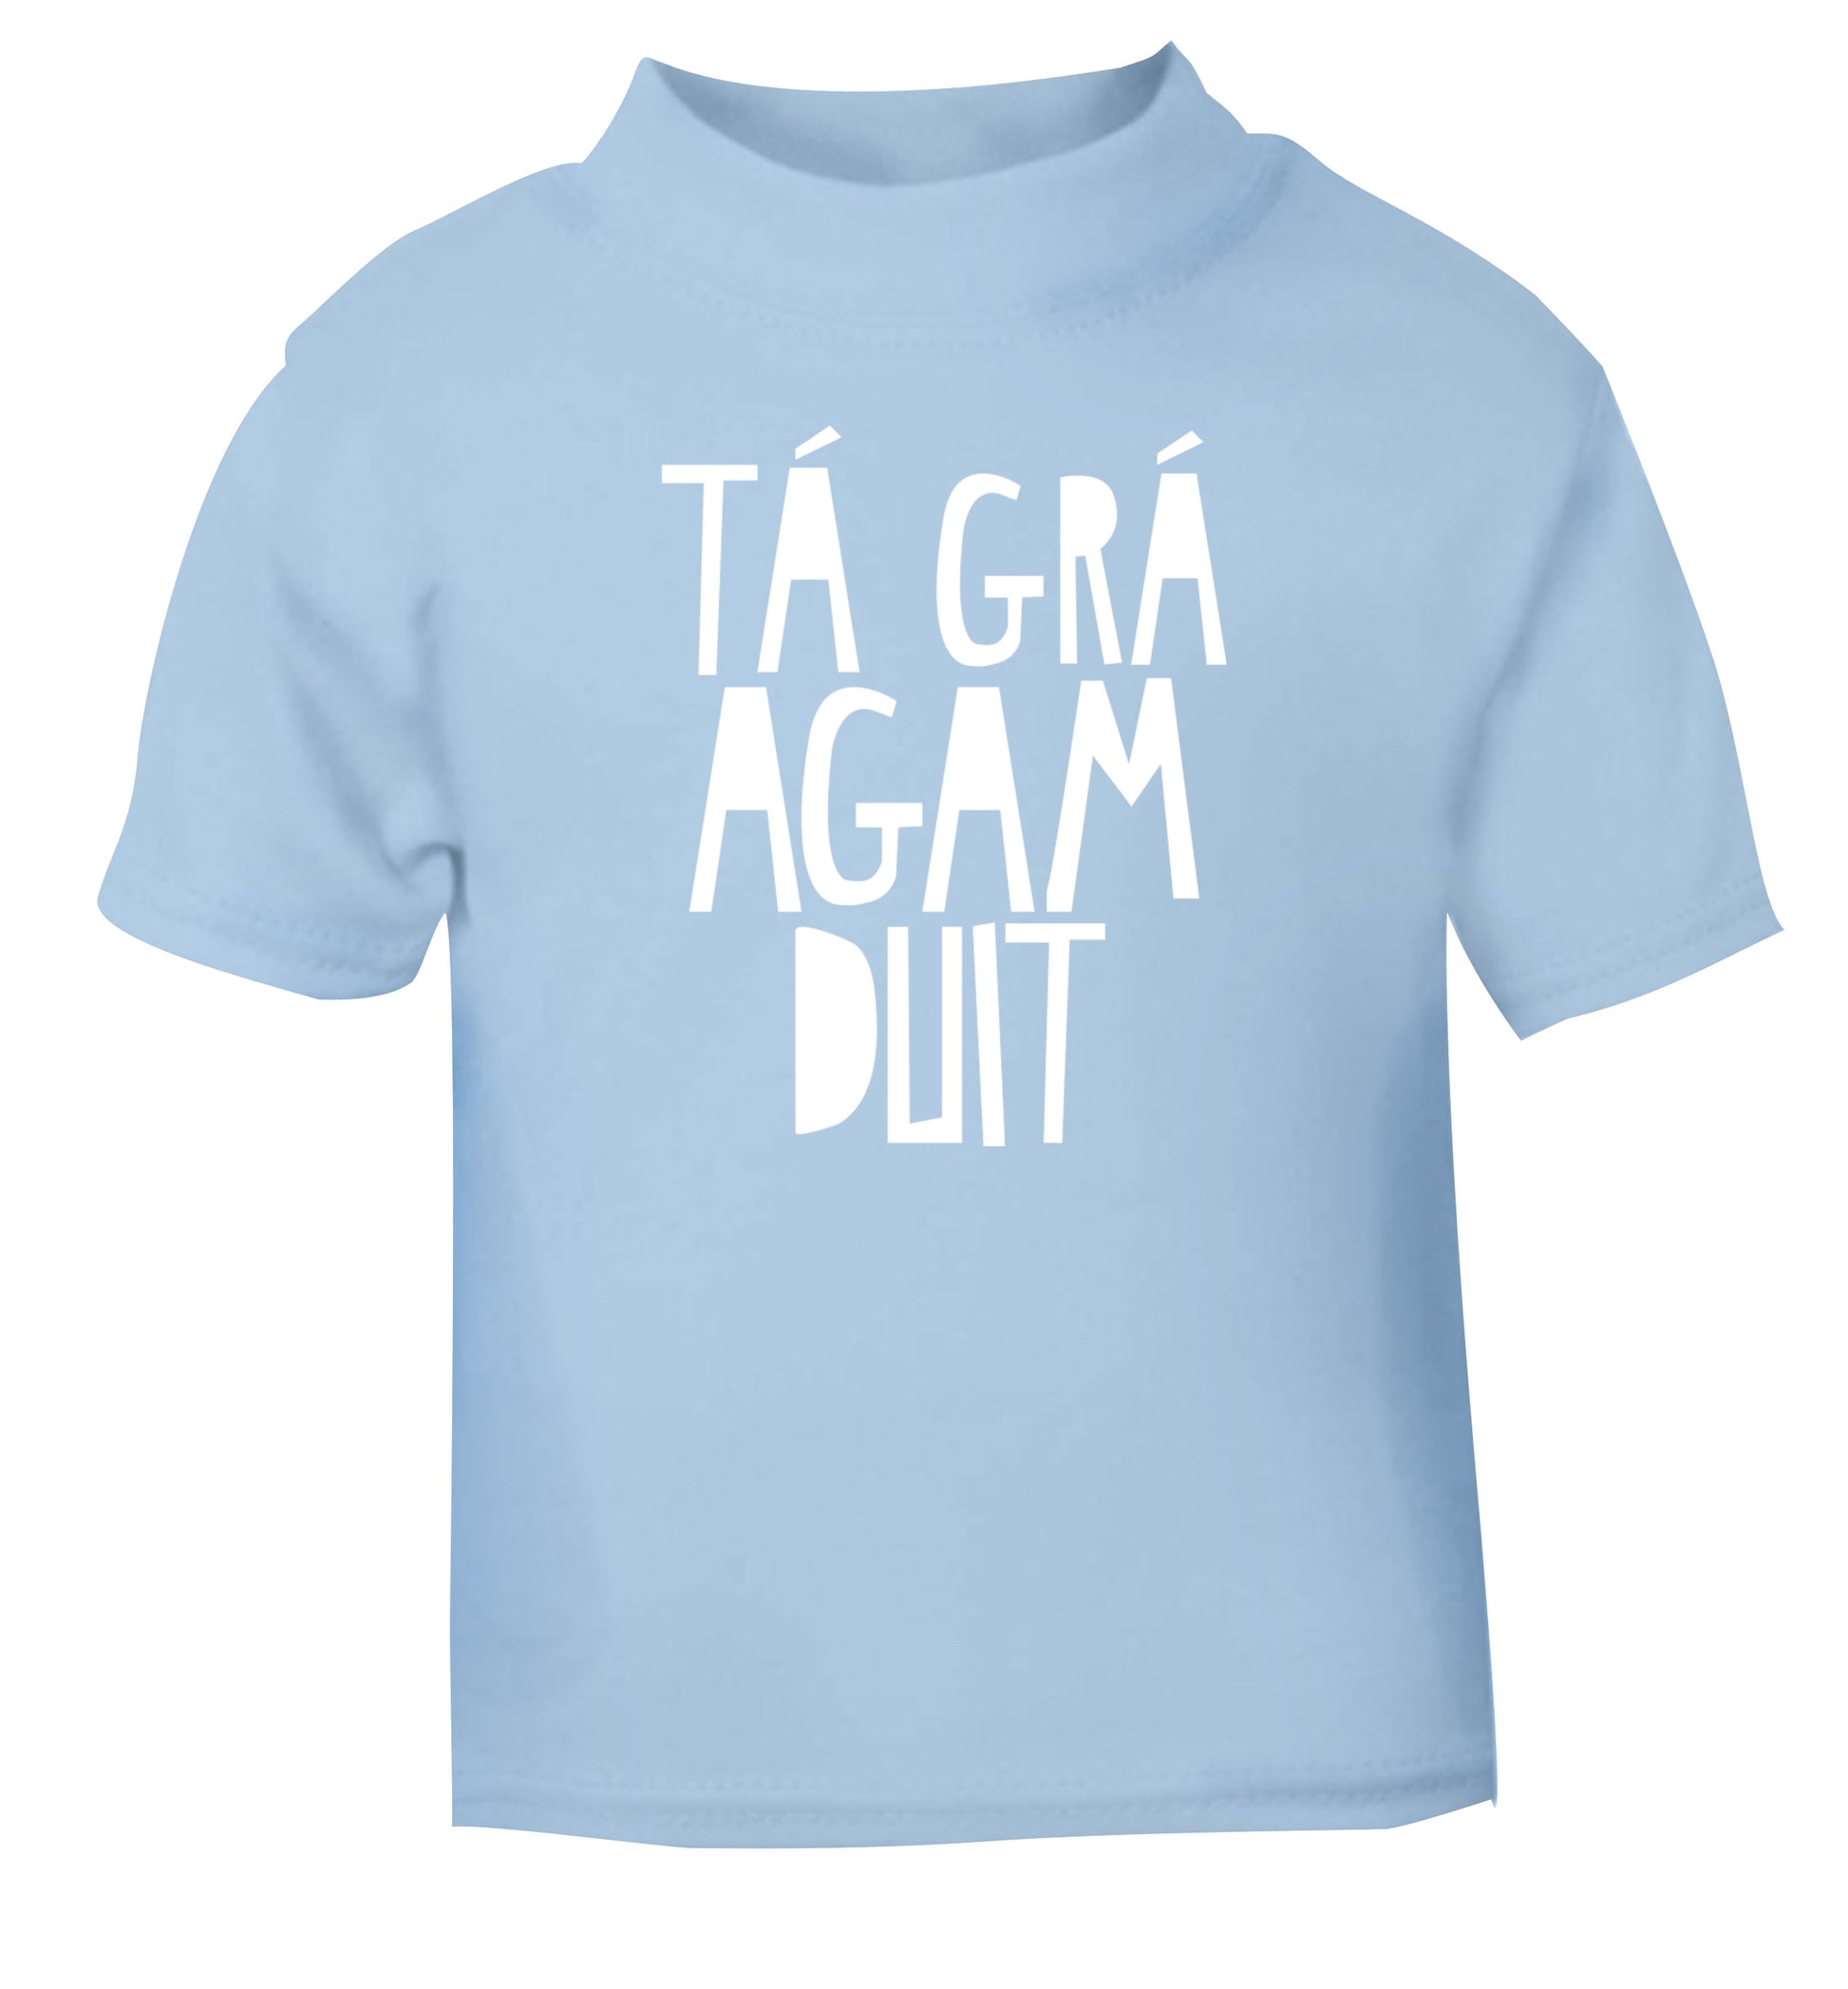 T‡ gr‡ agam duit - I love you light blue Baby Toddler Tshirt 2 Years